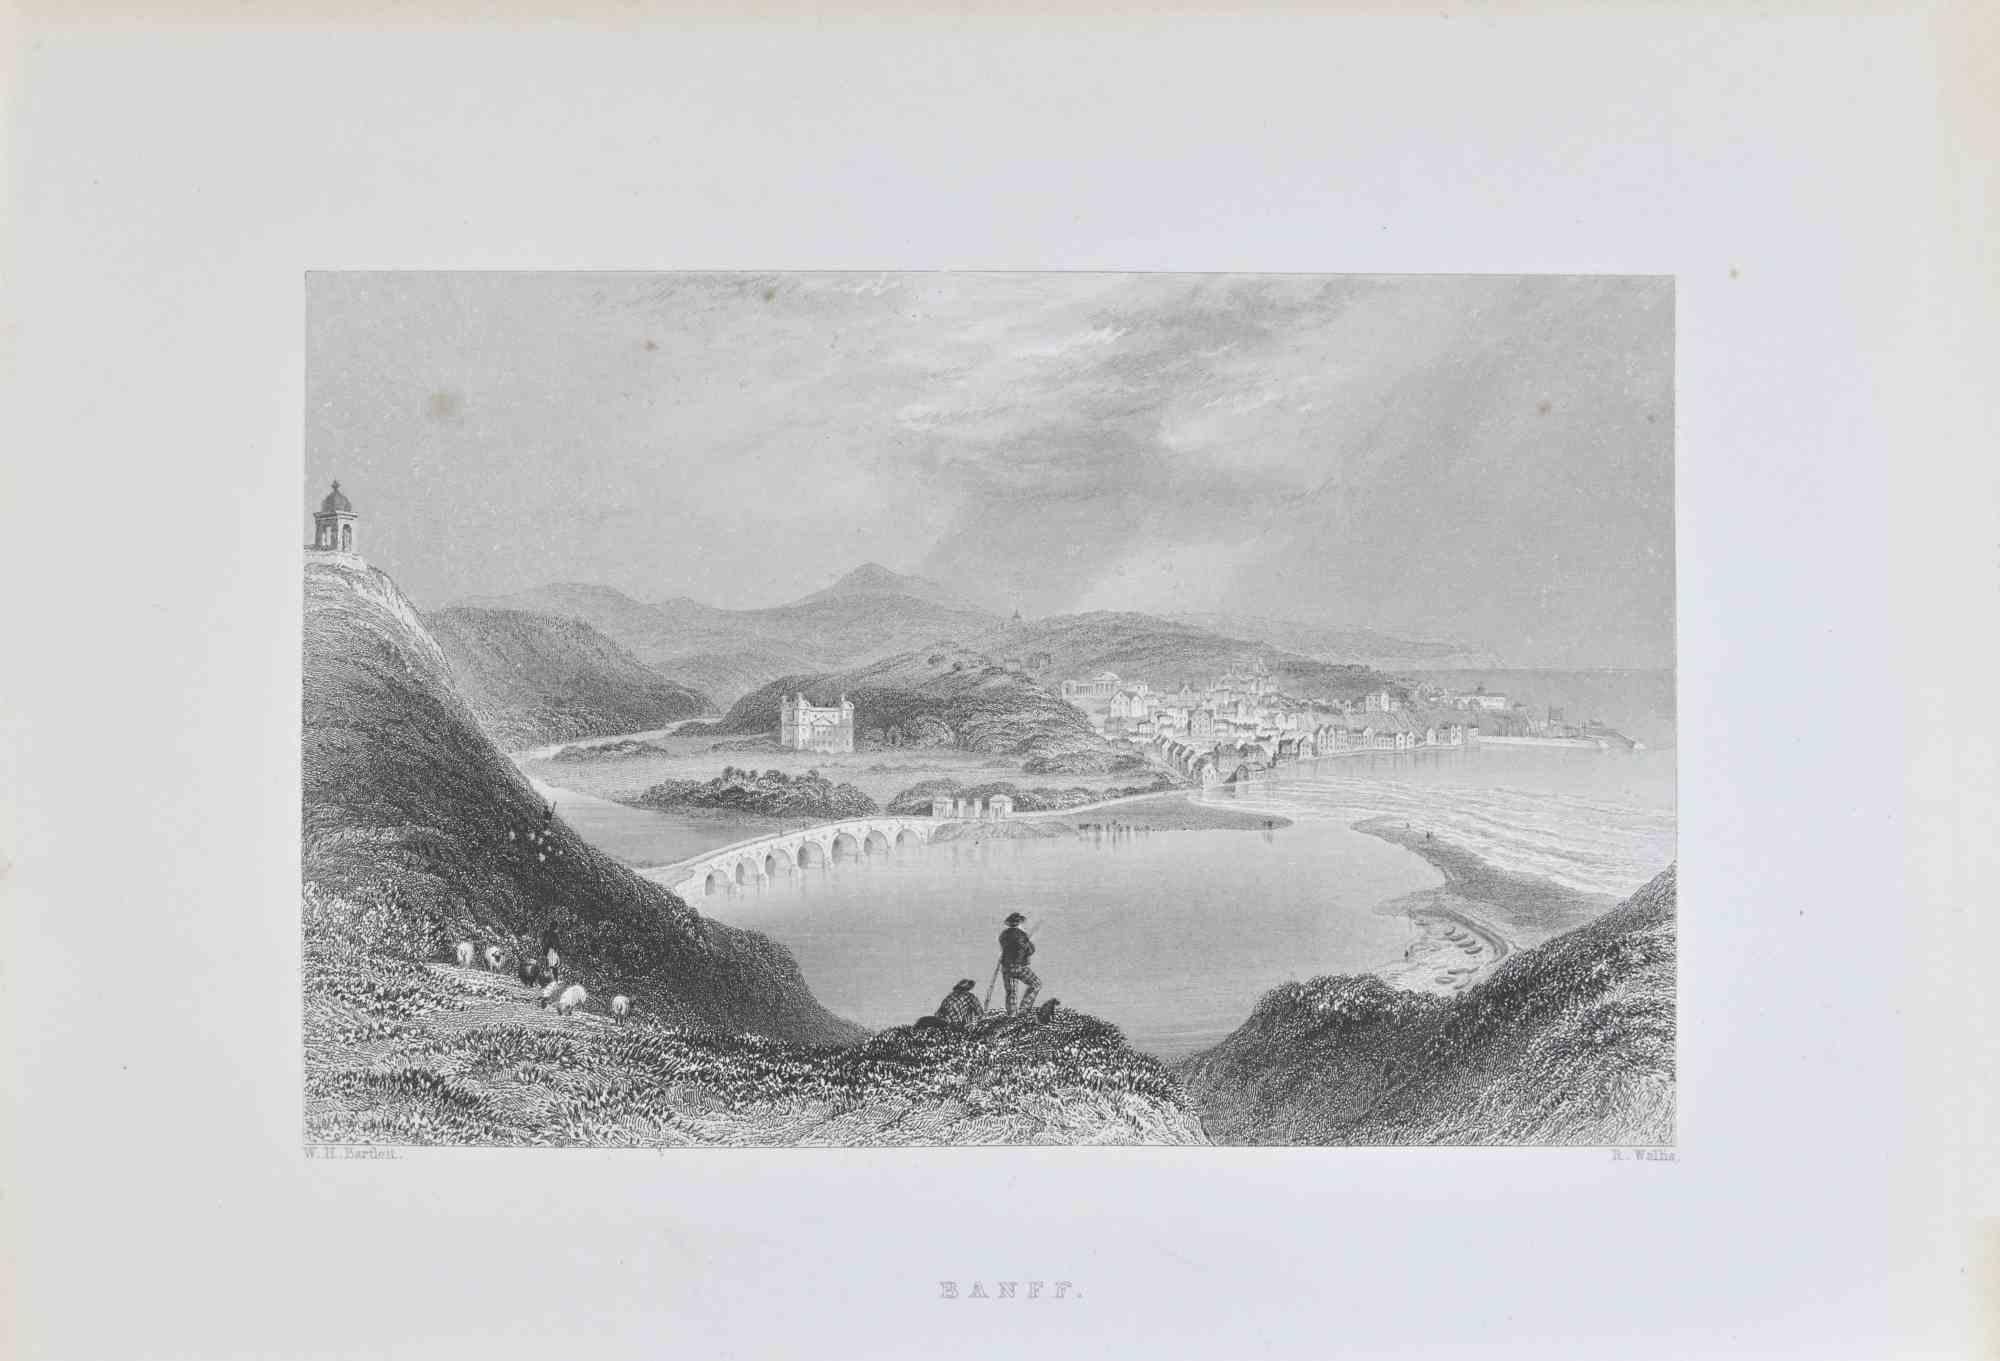 Banff is an engraving on paper realized by R. Waths in 1838.

The artwork is in good condition.

The artwork is depicted in a well-balanced composition.
